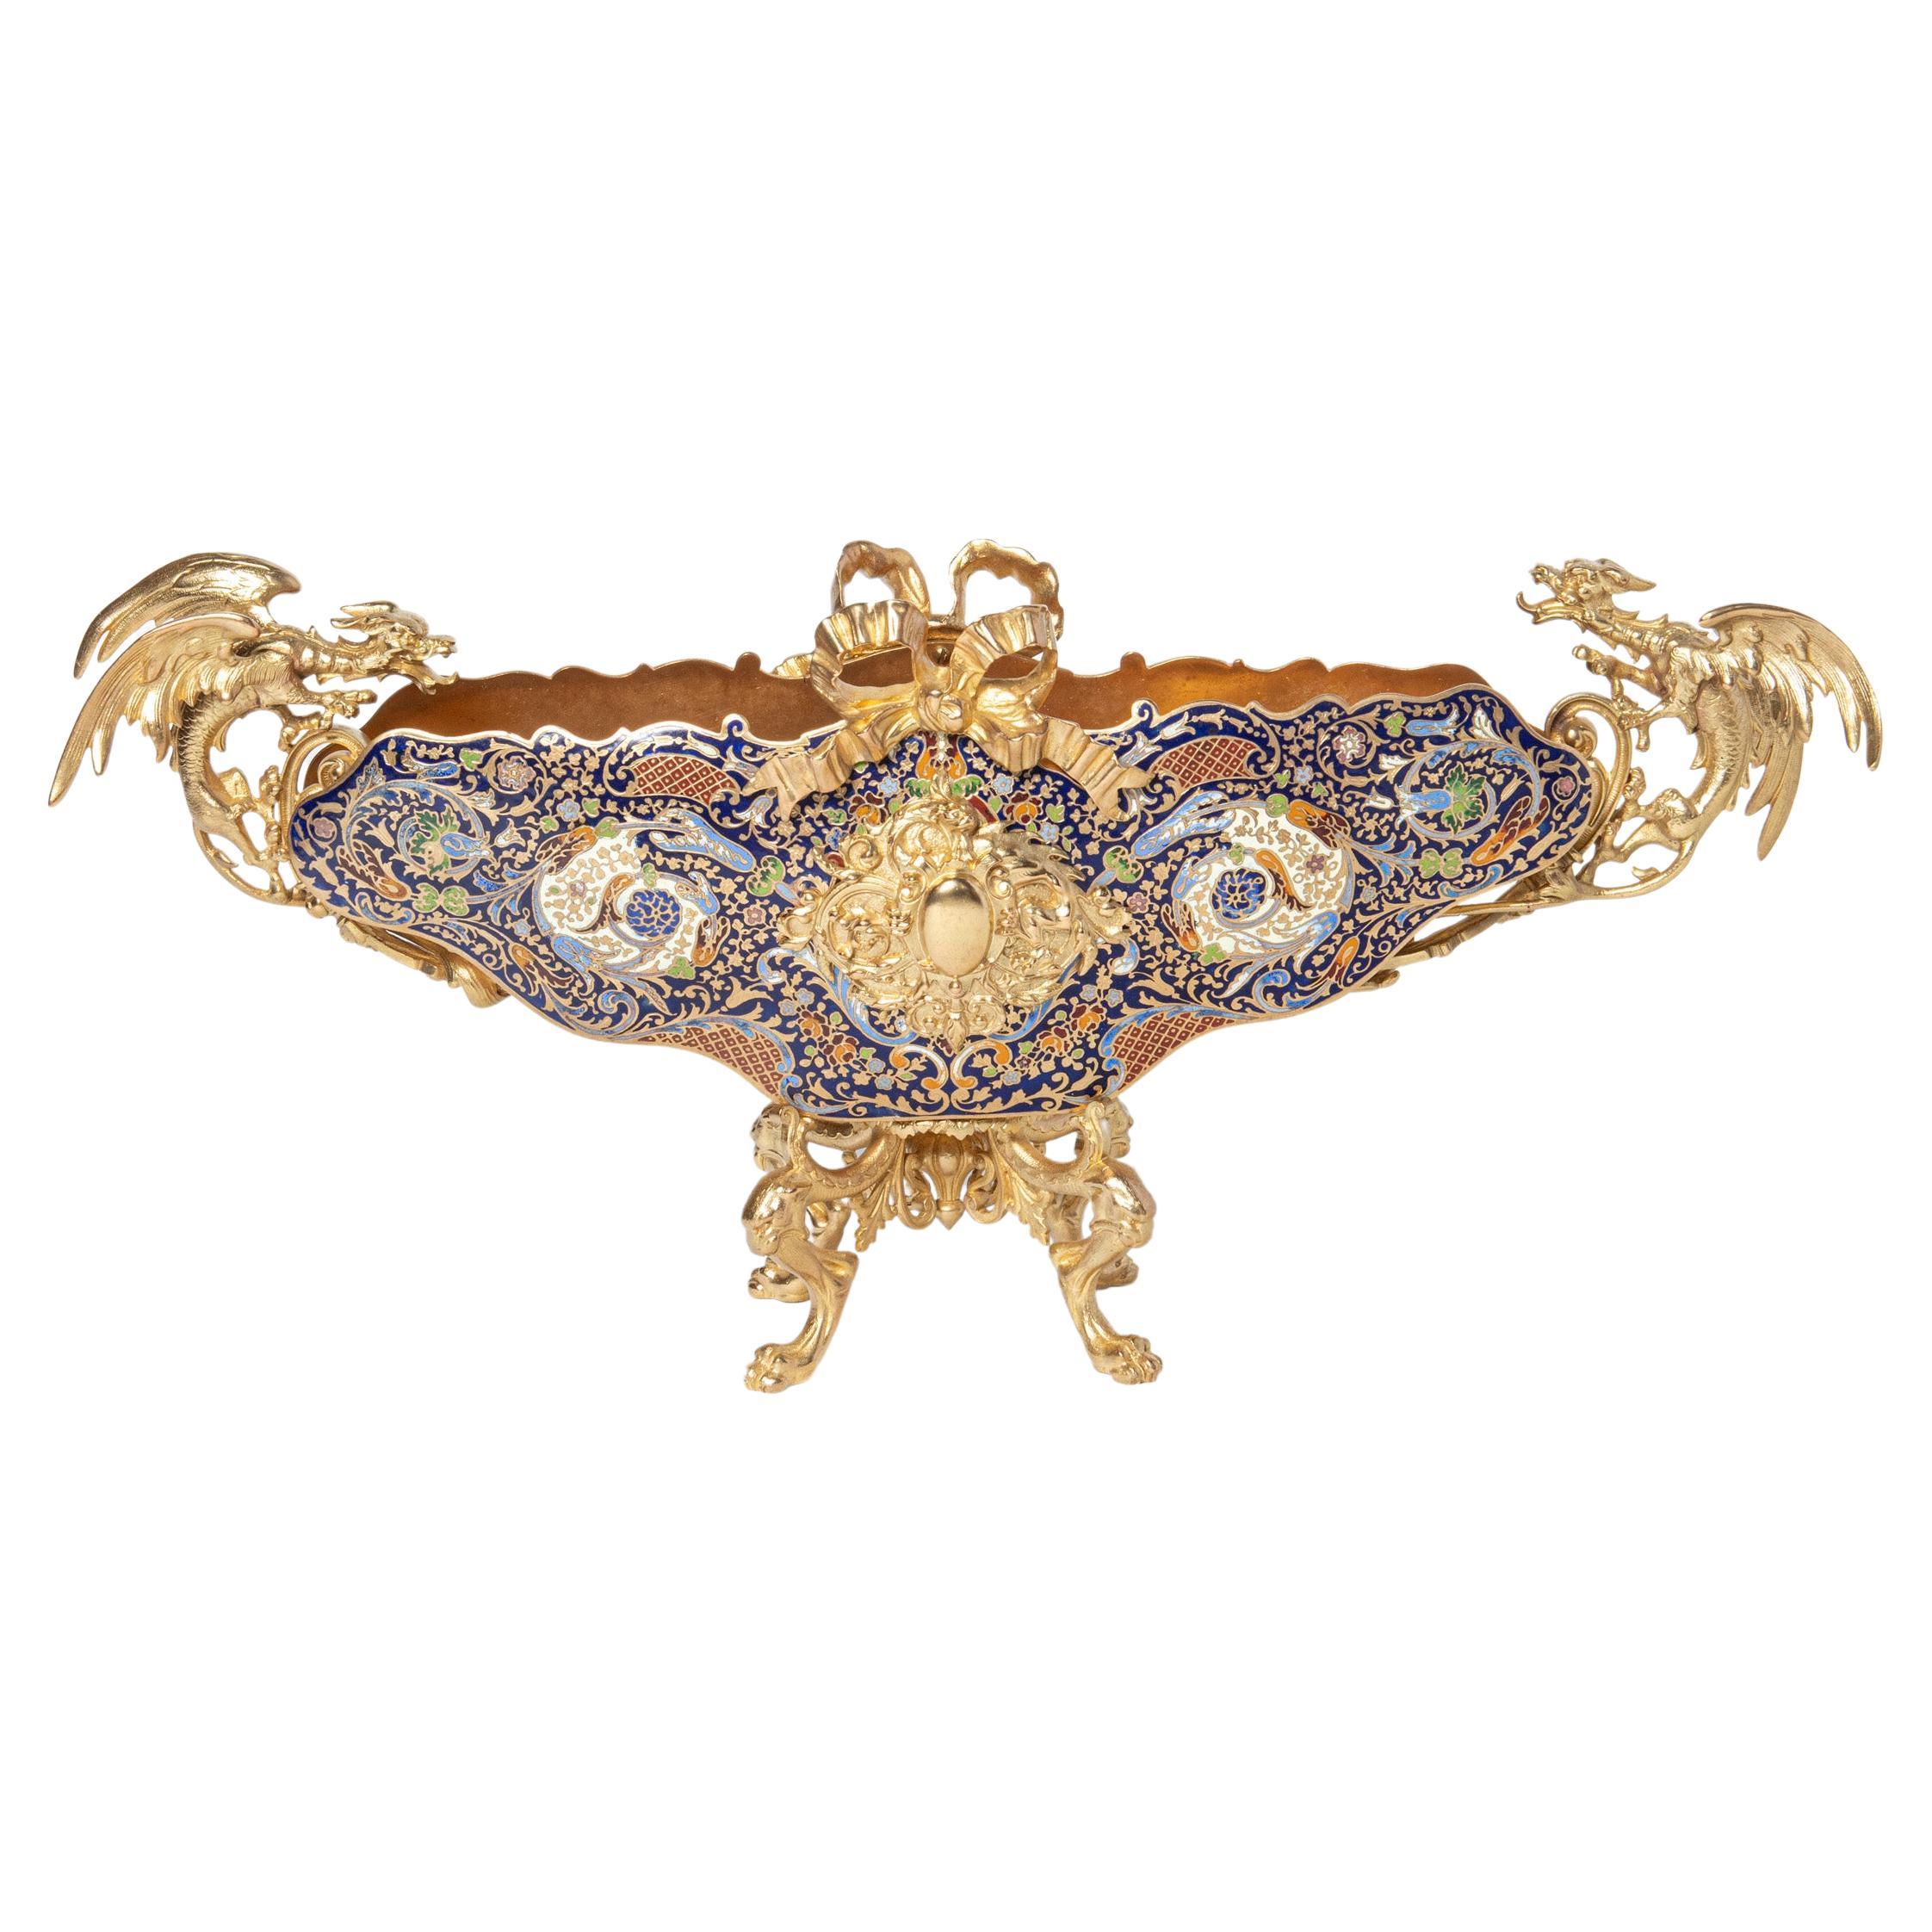 Enamel and gilt bronze jardiniere. France, late 19th century. For Sale